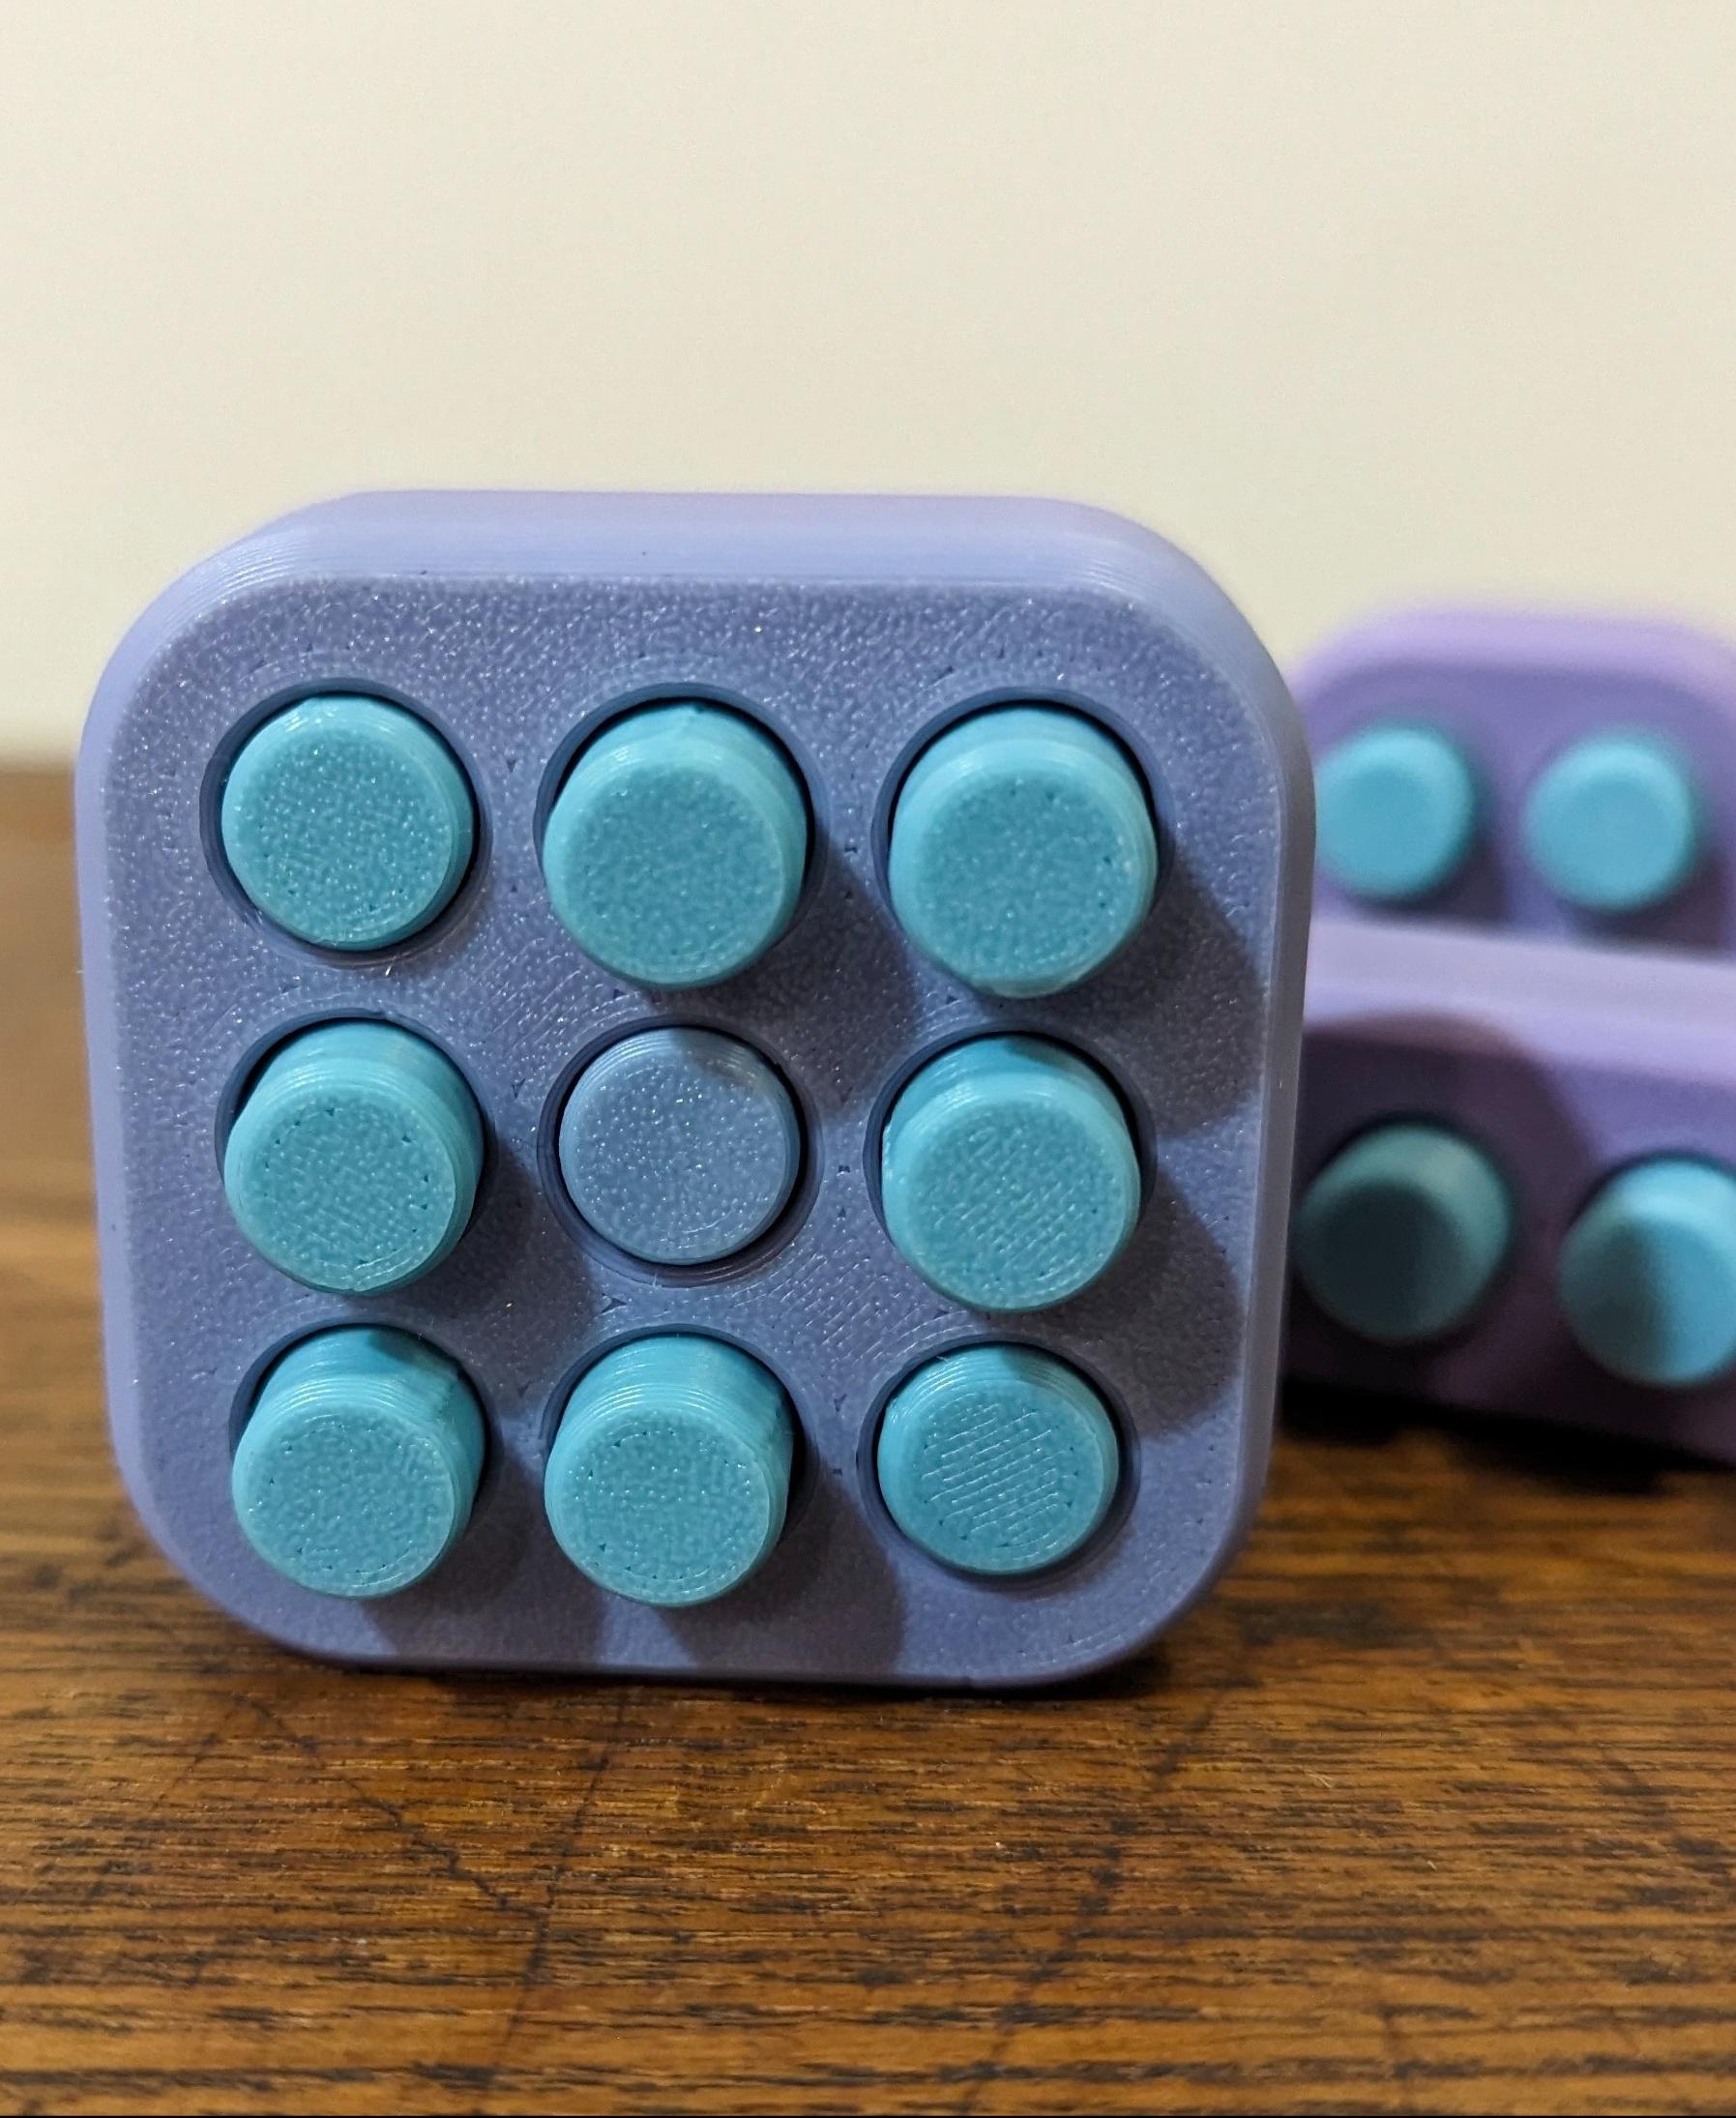 Pop Fidget (Multi - These were fun to print....once I realized I had somehow flipped one of the cases upside down.  (Can't put in the tpu gasket that way, lol)

Used @SliceWorx3D Aquarius for the cases and the buttons.

@HATCHBOX3D Digital Blue TPU 95A

https://youtube.com/shorts/oOTHZYqV7ug?si=ZDFCgWfSwW28kseB - 3d model